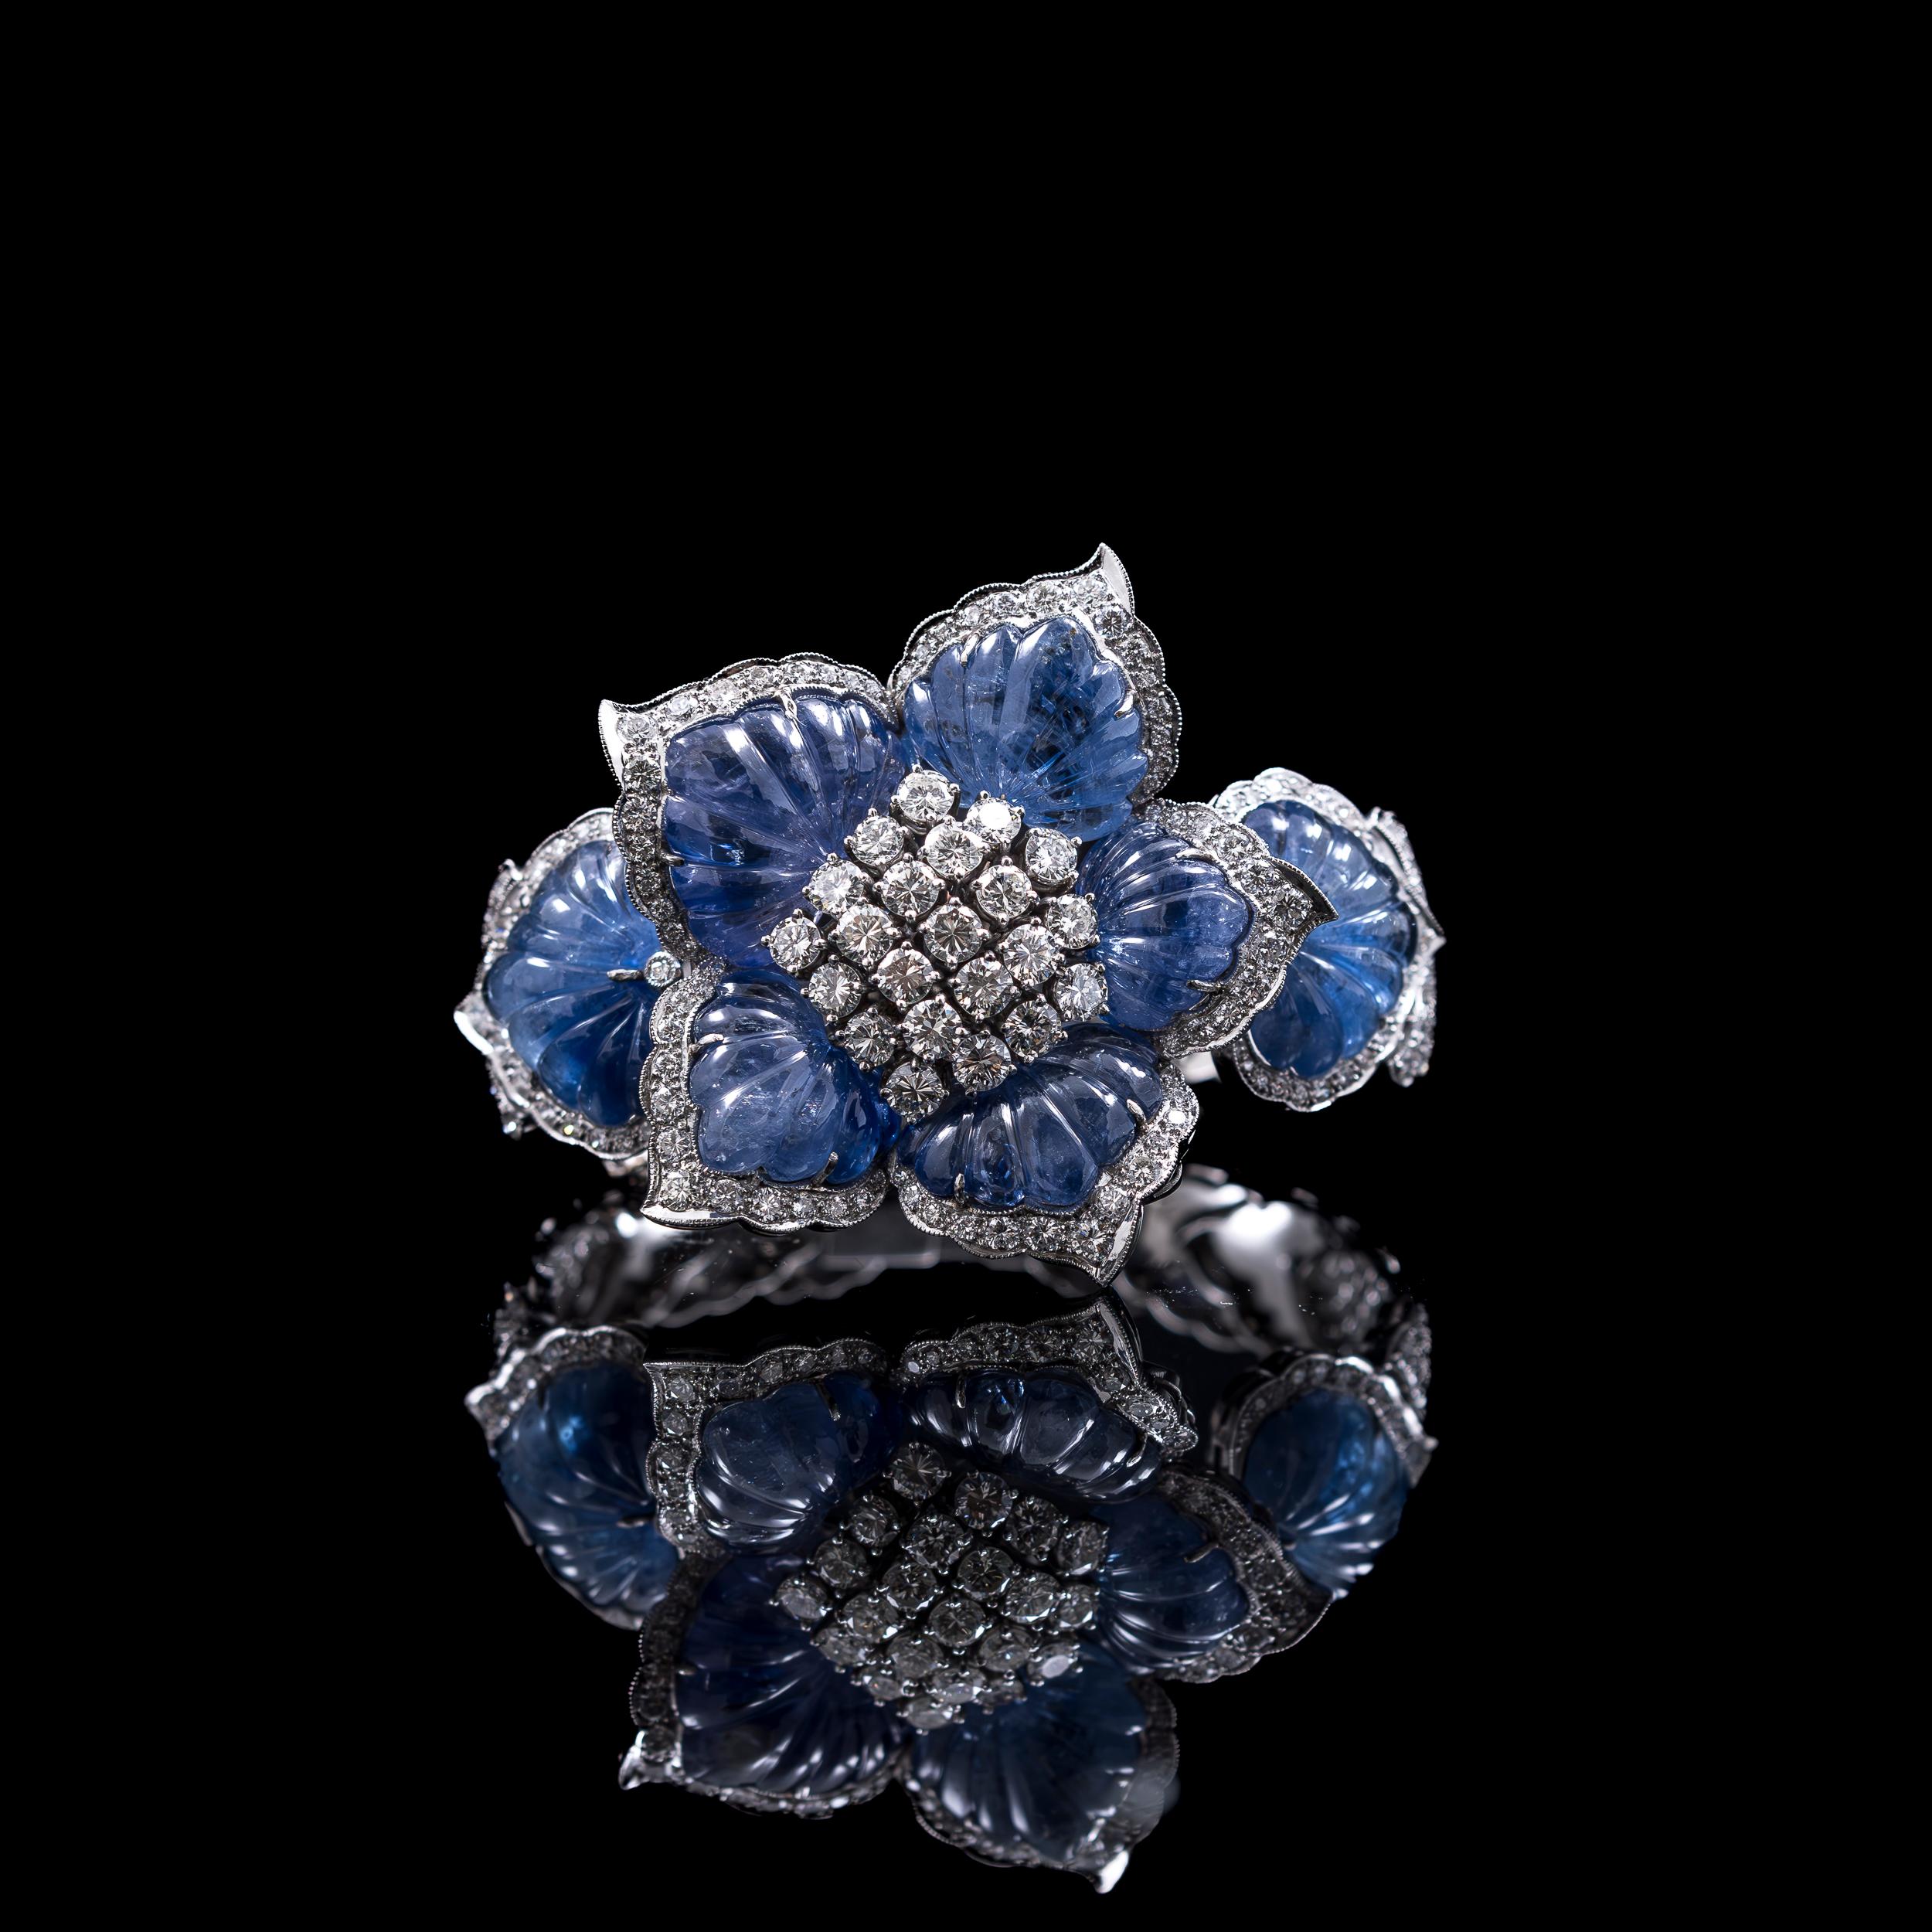 Mid-Century 100-carats color-change carved sapphire and 11-carats round brilliant-cut diamond flower bracelet in platinum, 1950s/1960s.

At the heart of this mesmerizing piece lies a central flowerhead motif, adorned with a cluster of 22 resplendent